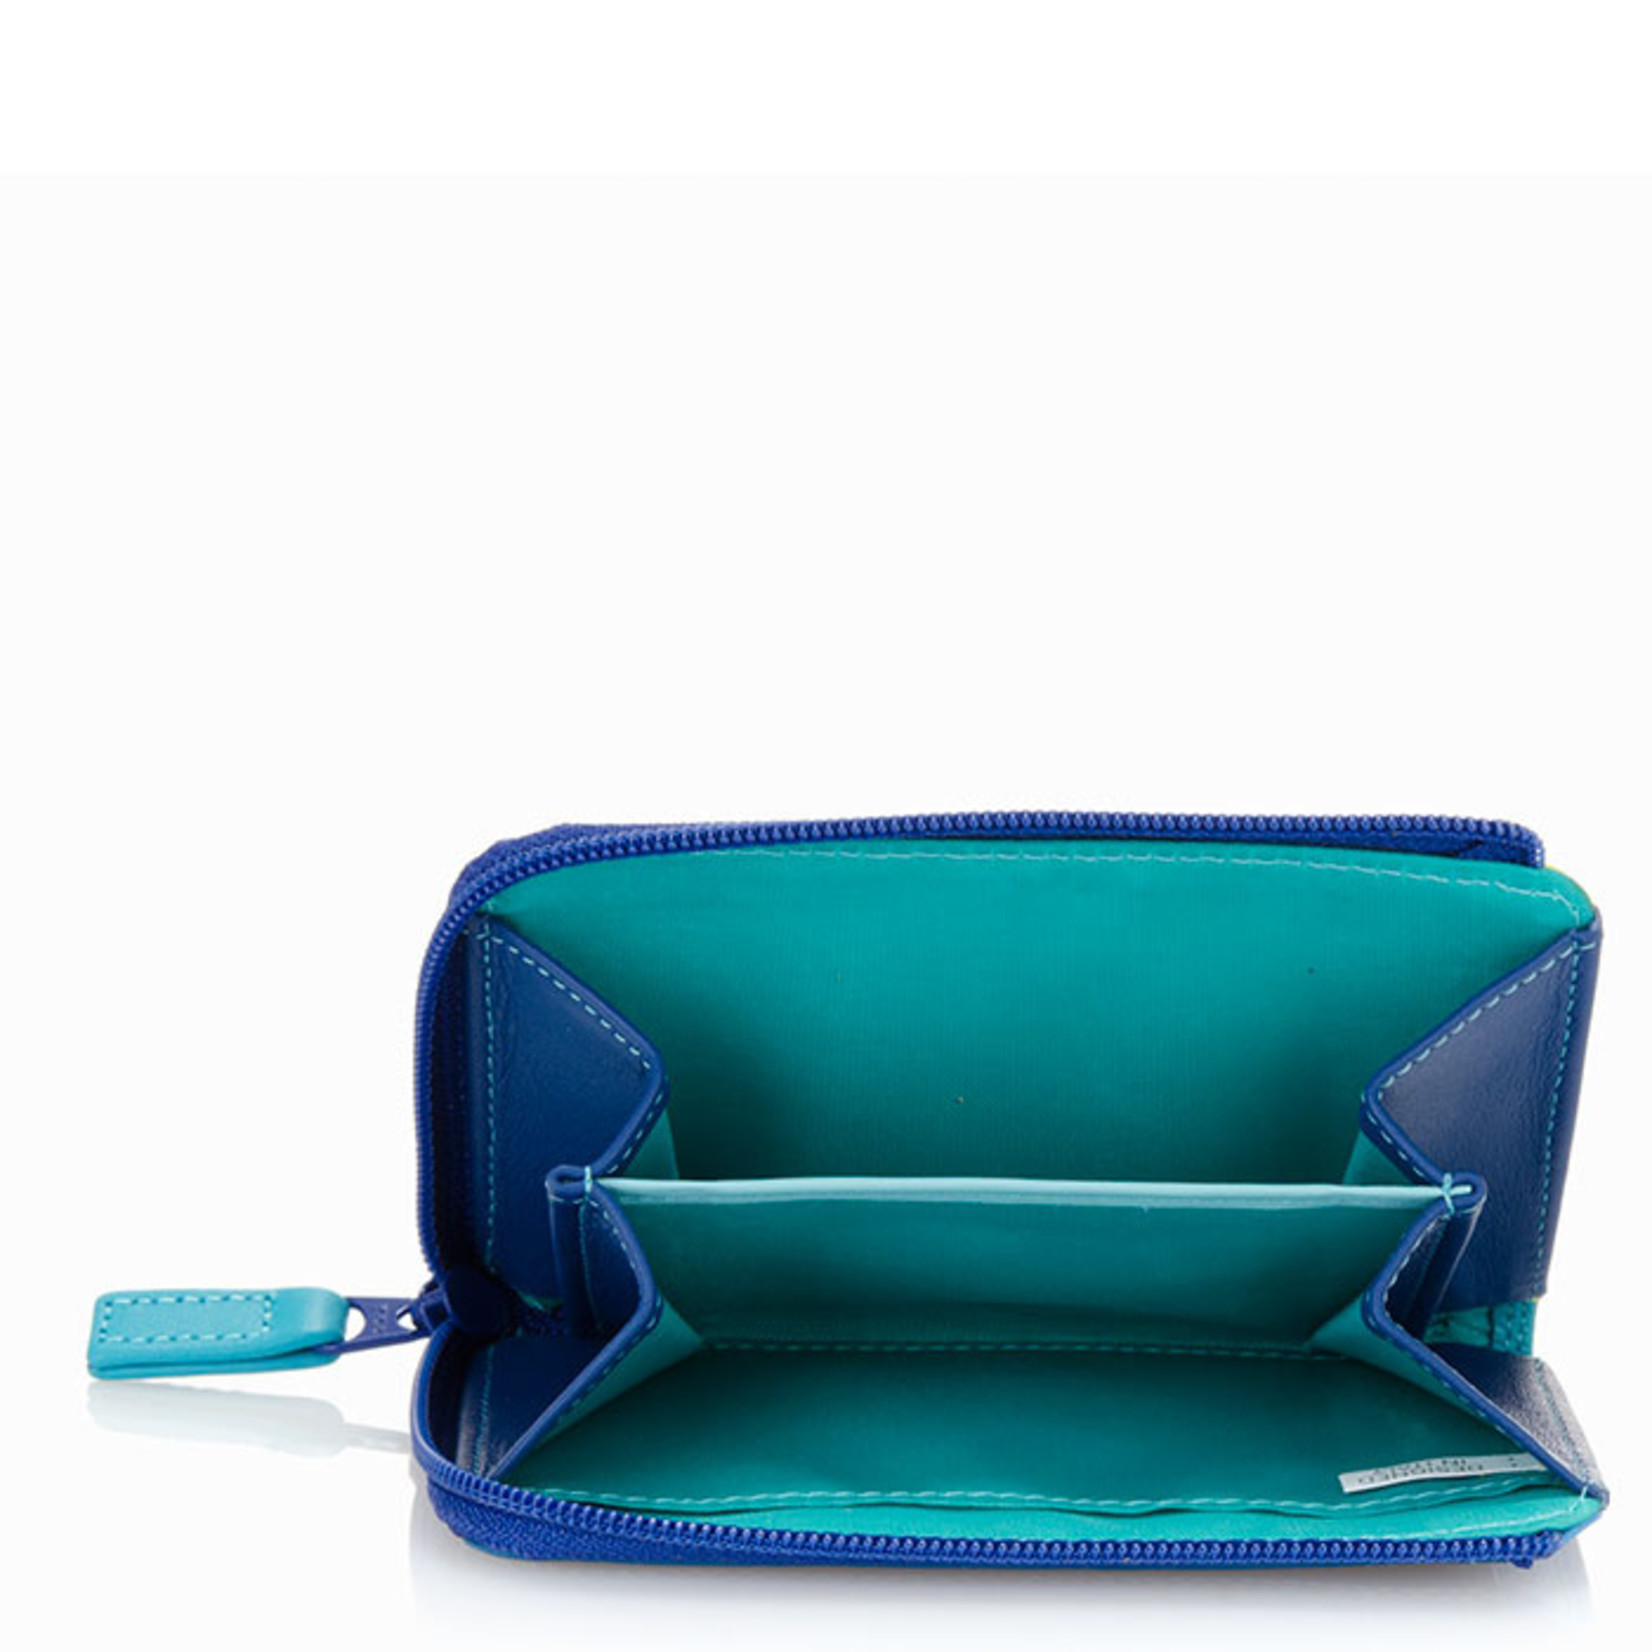 Mywalit Small Zip Purse